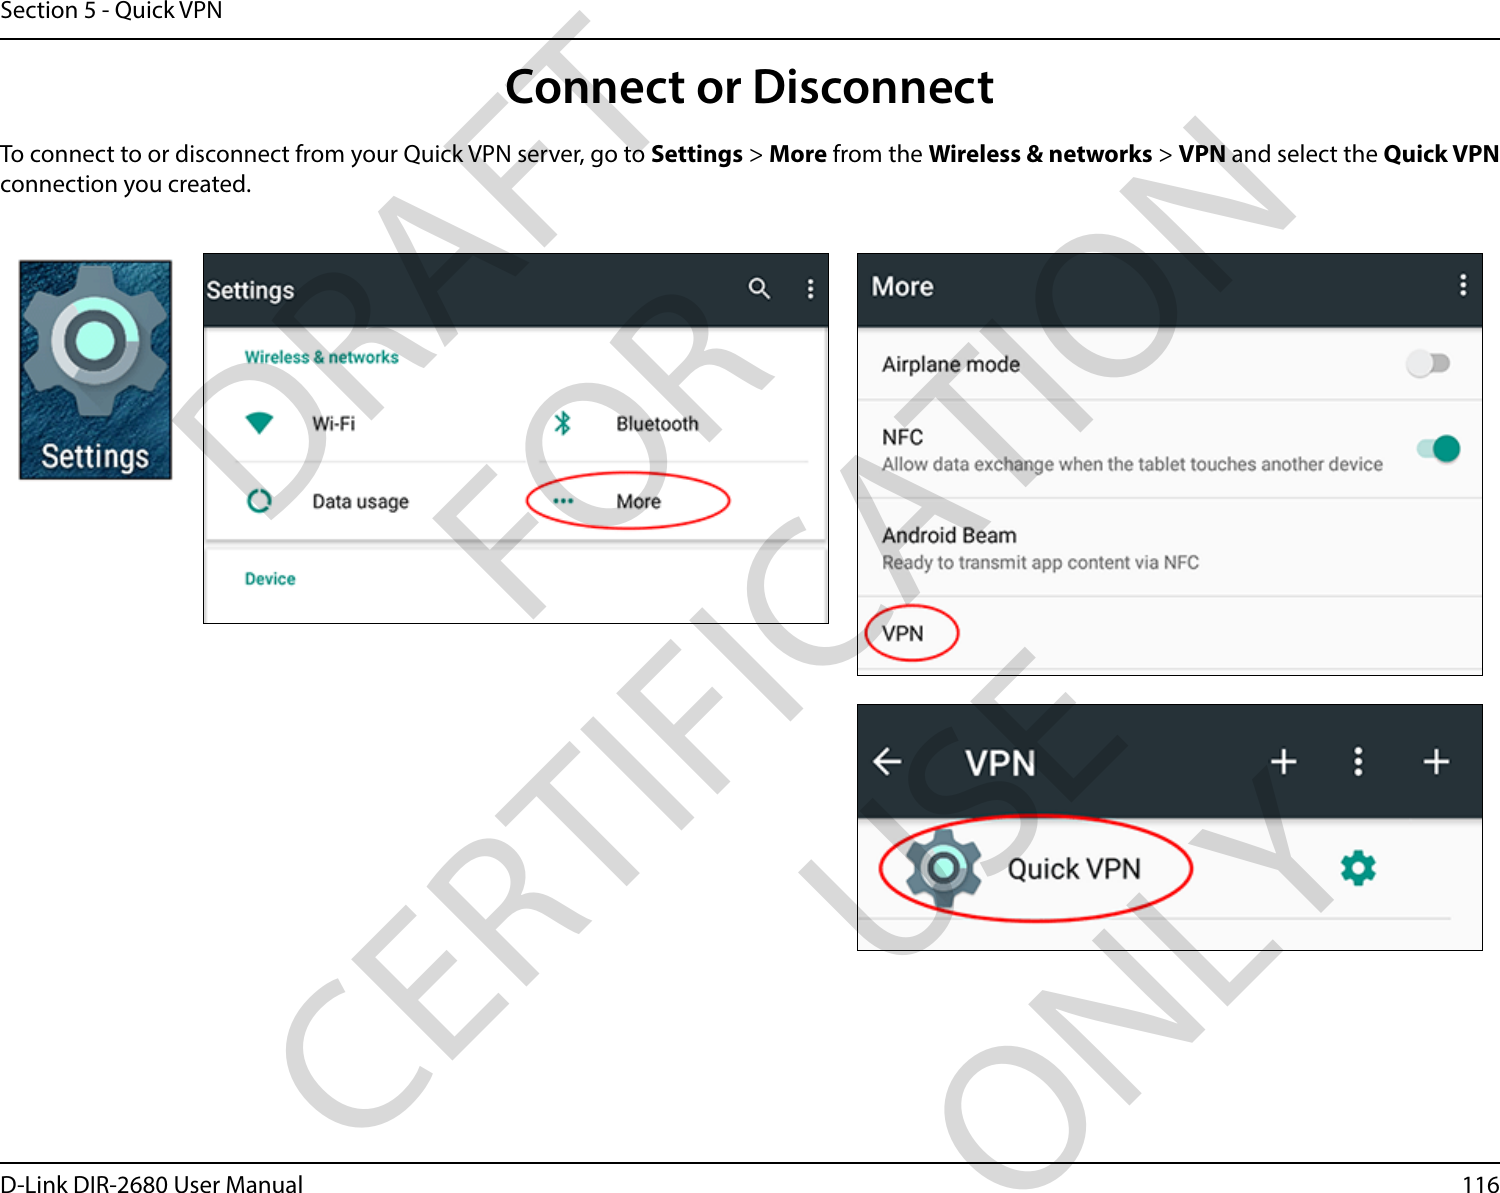 116D-Link DIR-2680 User ManualSection 5 - Quick VPNConnect or DisconnectTo connect to or disconnect from your Quick VPN server, go to Settings &gt; More from the Wireless &amp; networks &gt; VPN and select the Quick VPN connection you created.DRAFT FOR CERTIFICATION USE ONLY